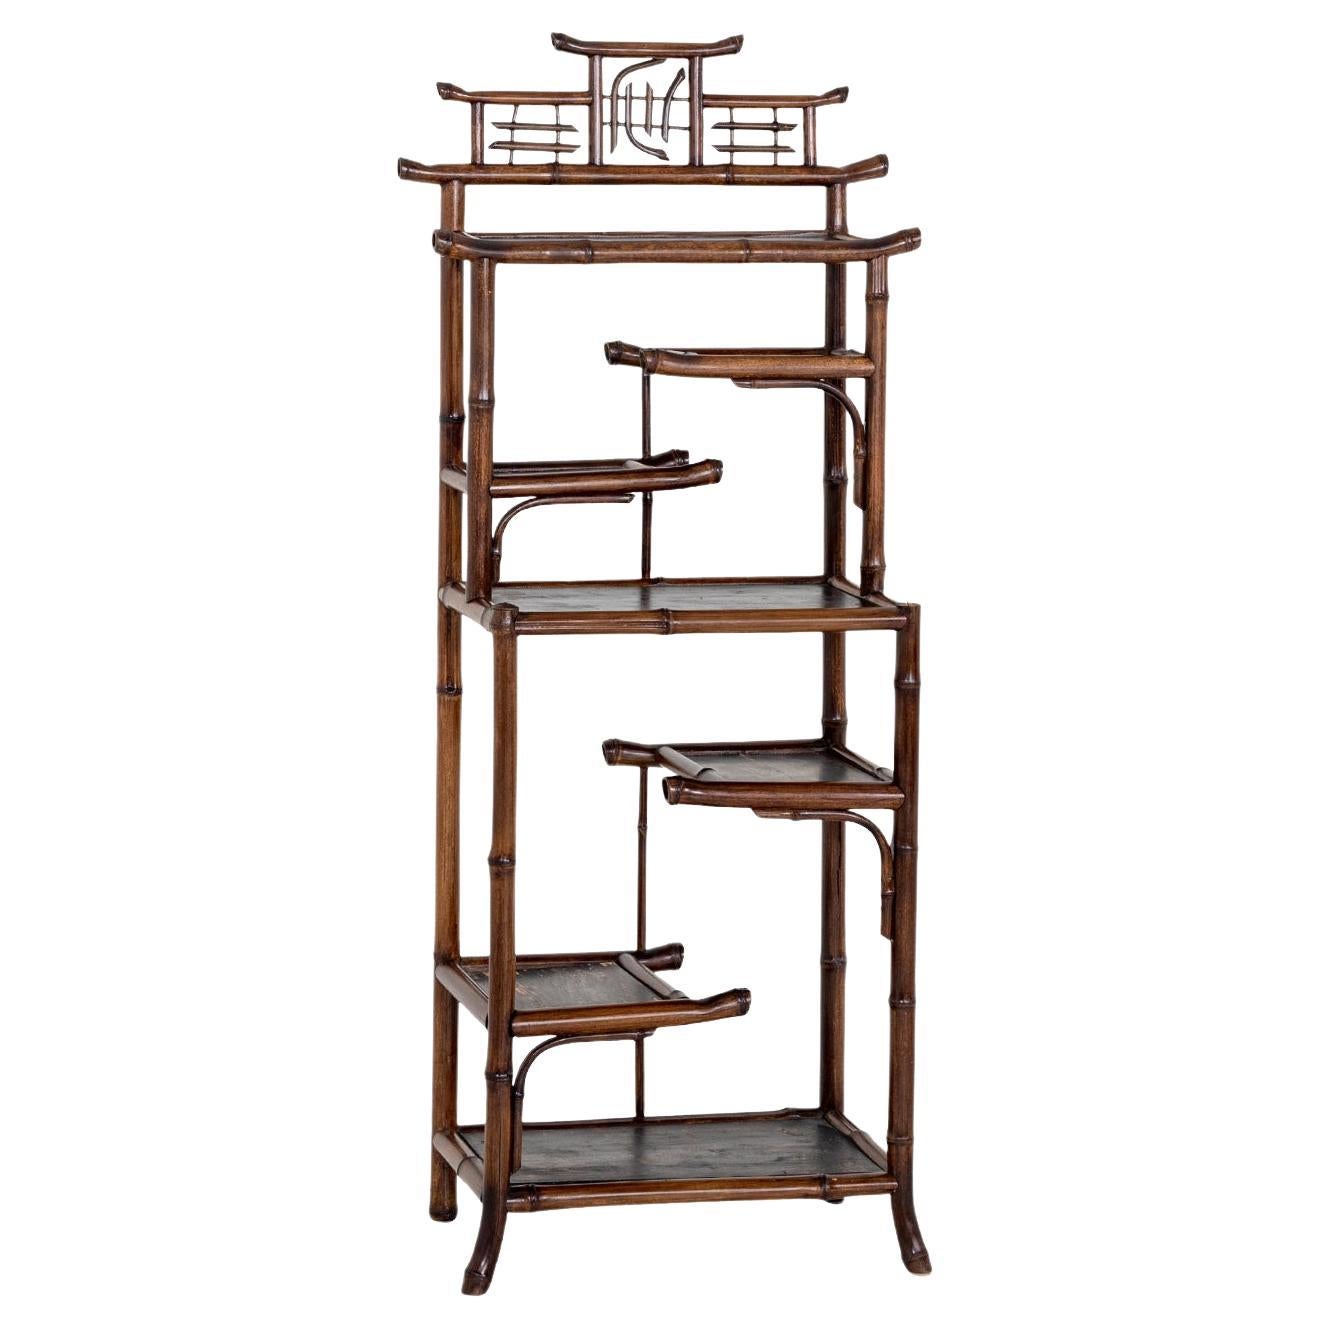 20th Century Dark-Brown French Bamboo Book Shelving, Vintage Wall Rack, Unit